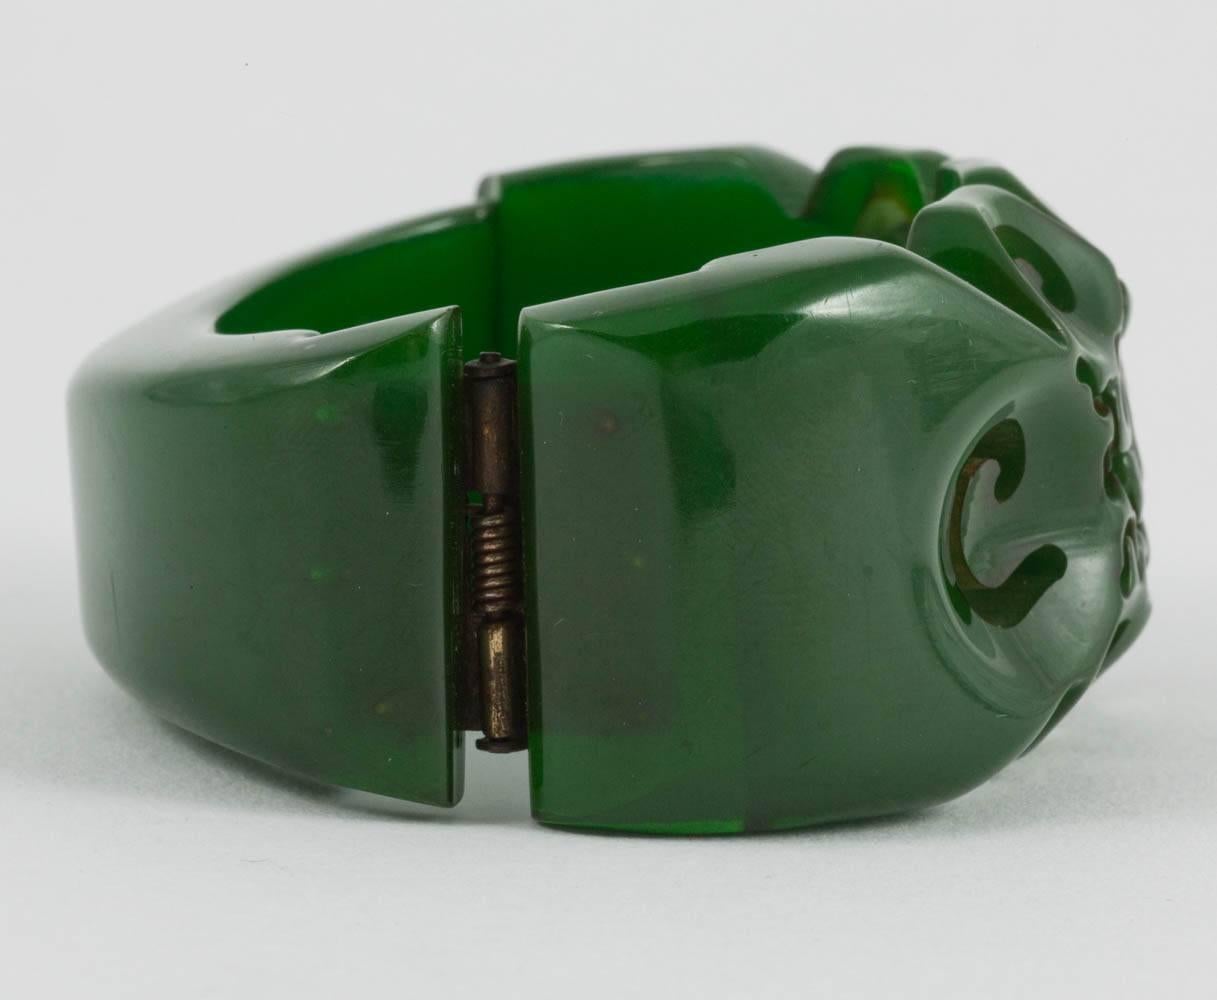 A beautiful hand carved bakelite bracelet, in a warm deep green colour, from the 1930s.
This bracelet is one of three listed this week and all three would look lovely worn altogether, 'stacked' in the celebrated style of Nancy Cunard, or worn